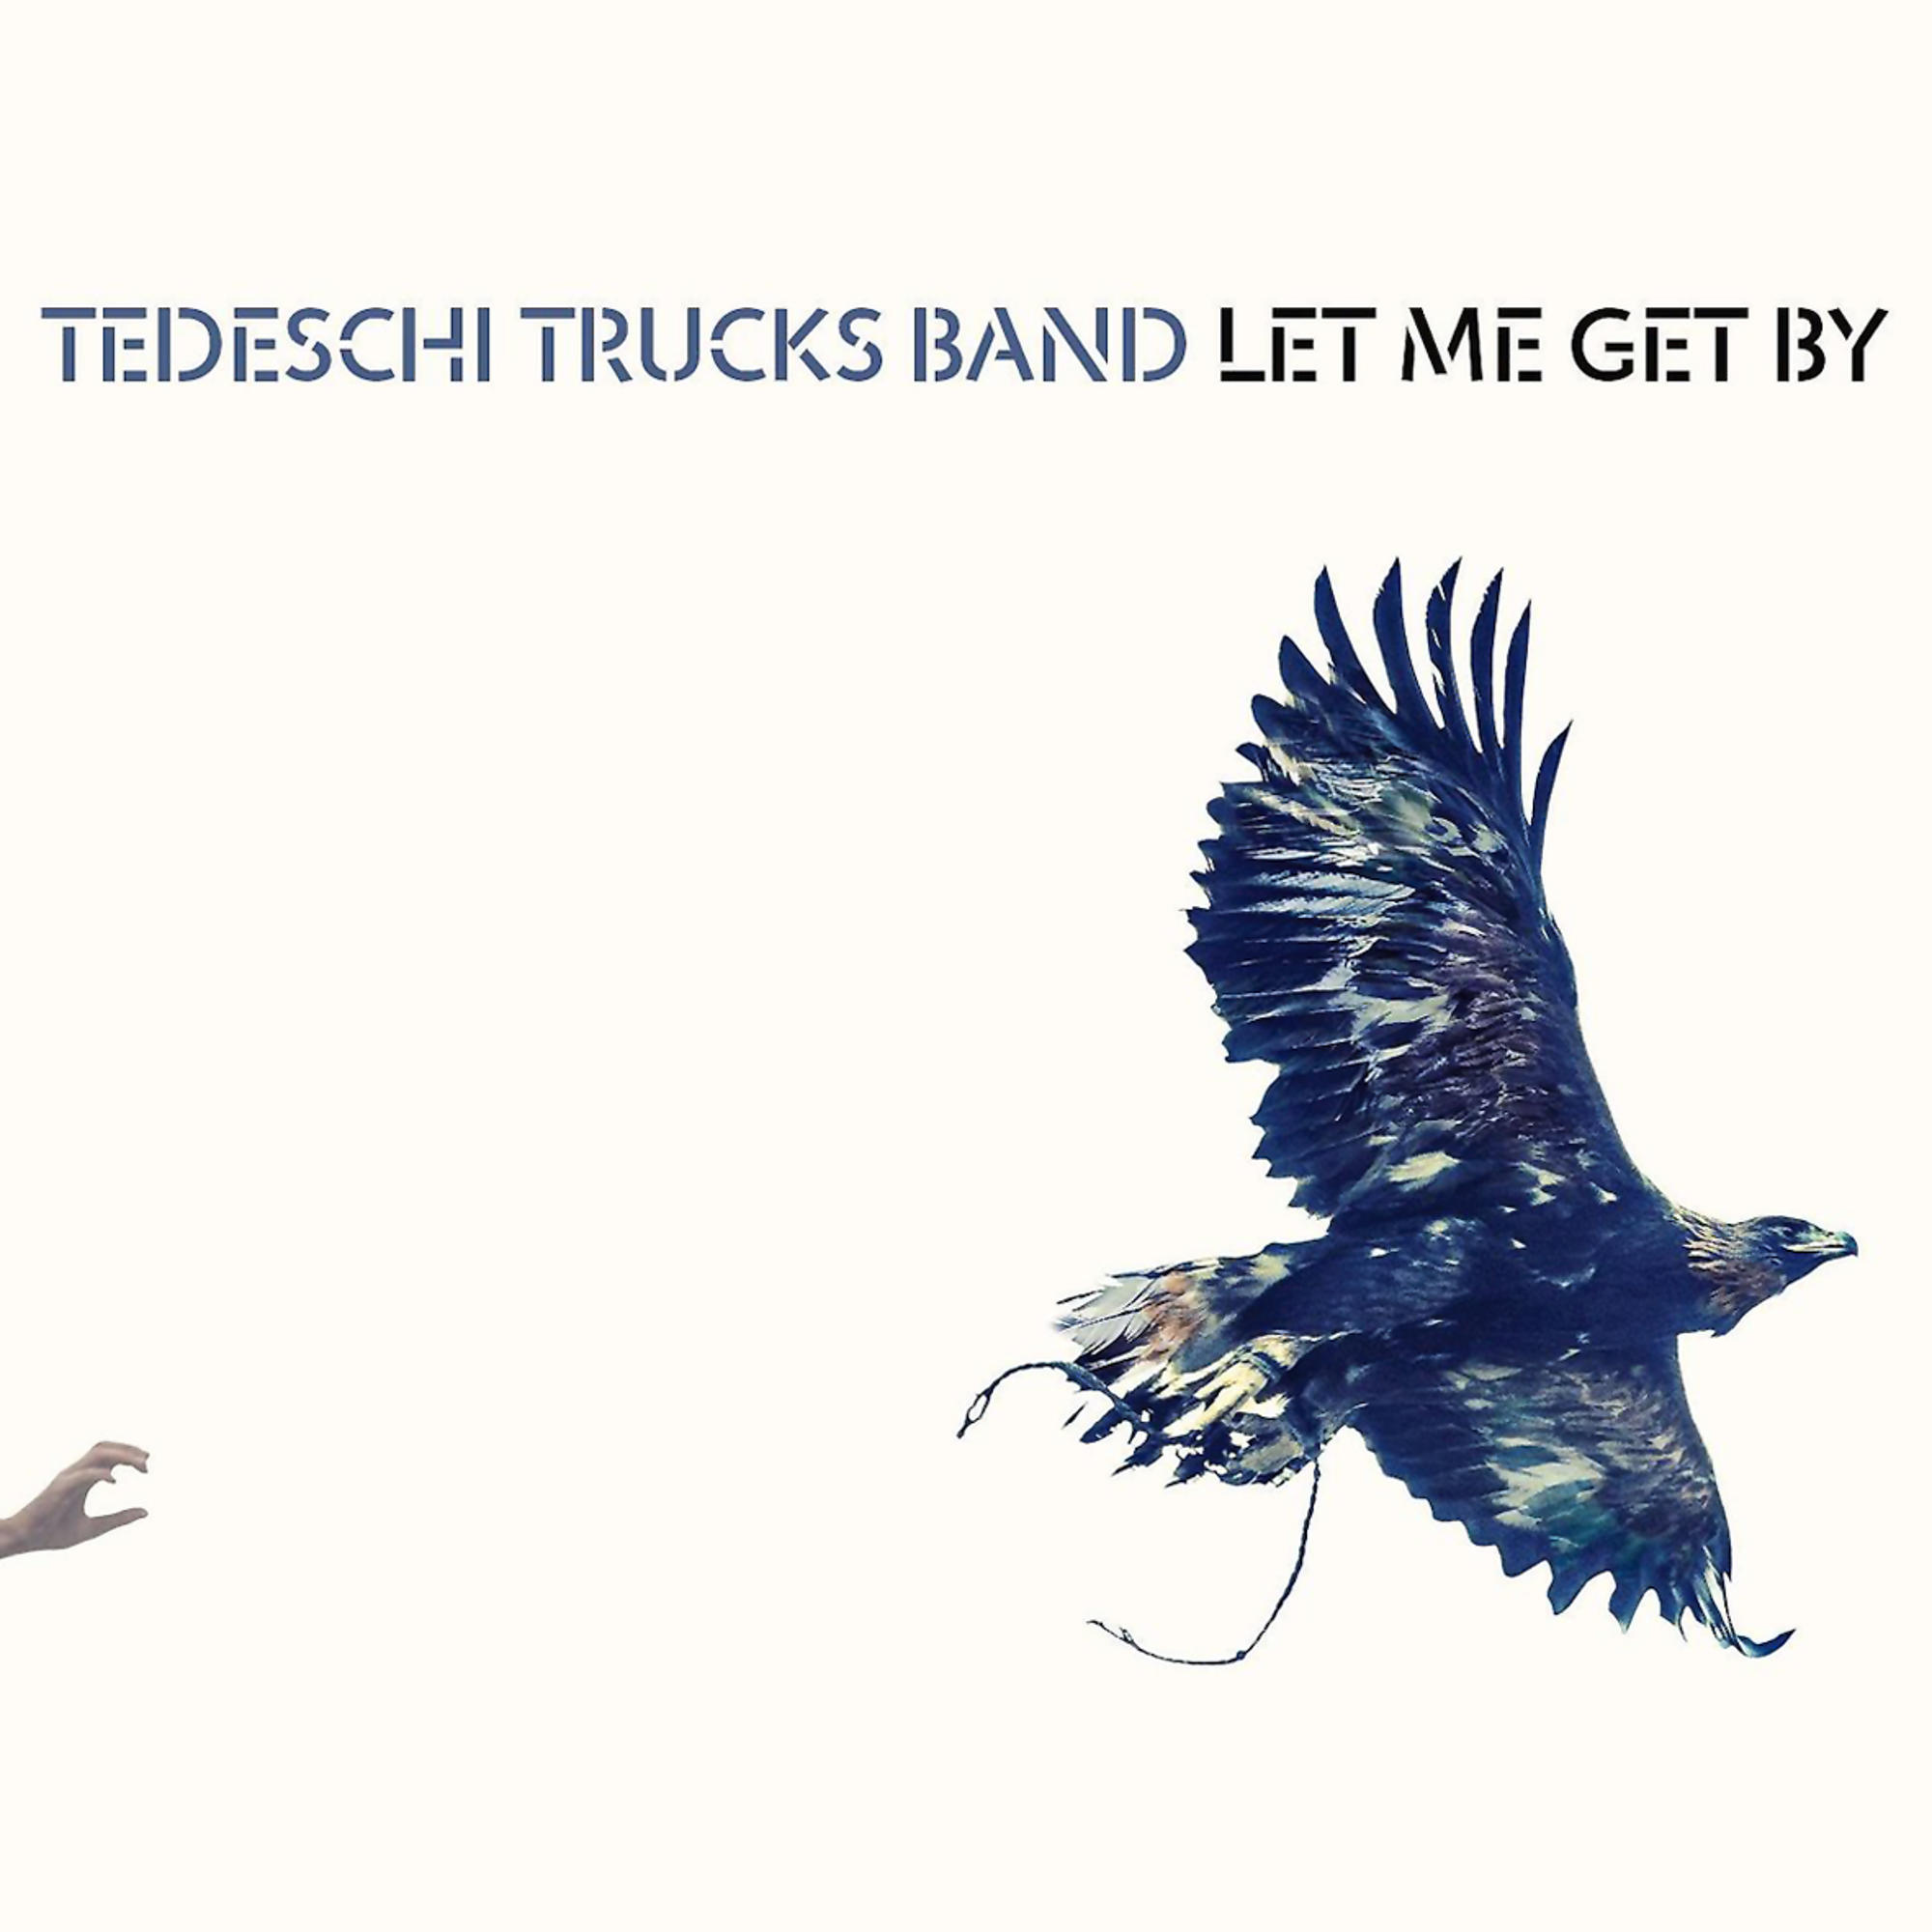 Me - Tedeschi Trucks Band Get (CD) Let - By